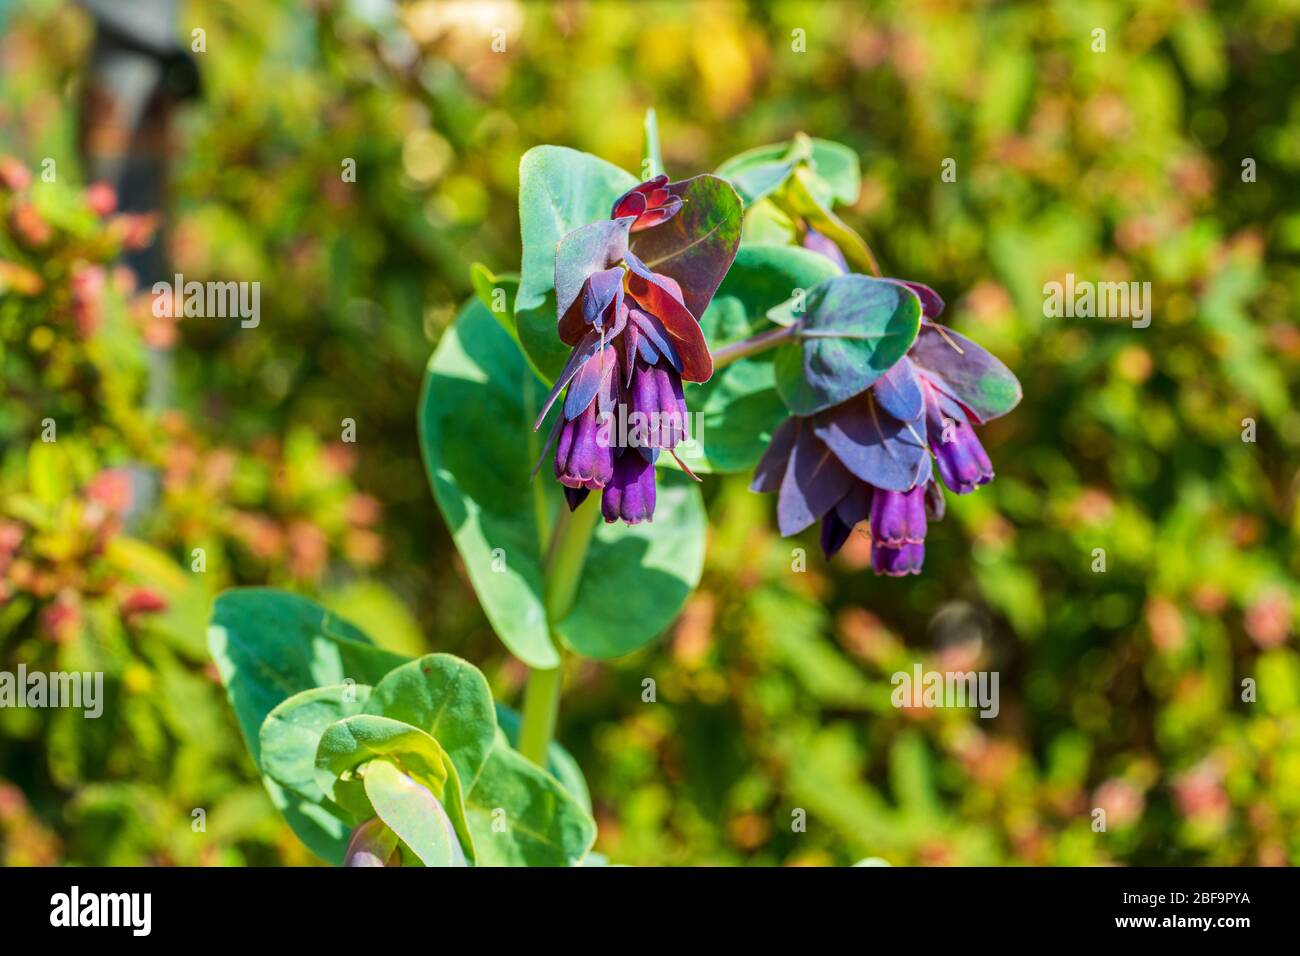 Cerinthe major 'Purpurascens' (Honeywort) flowering in a garden in spring sunshine; these flowers are loved by bees Stock Photo